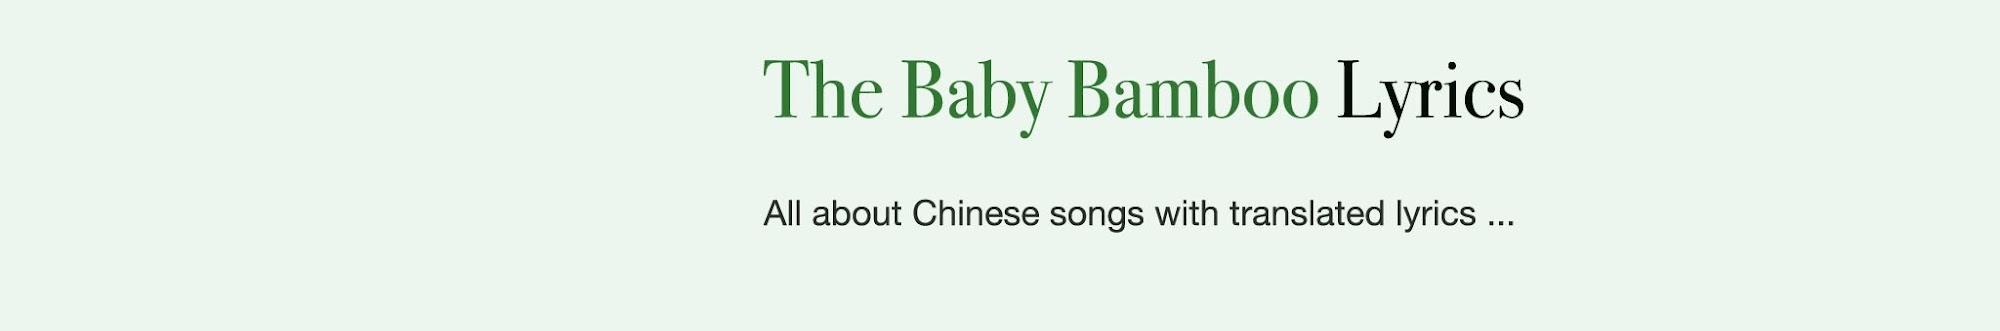 The Baby Bamboo